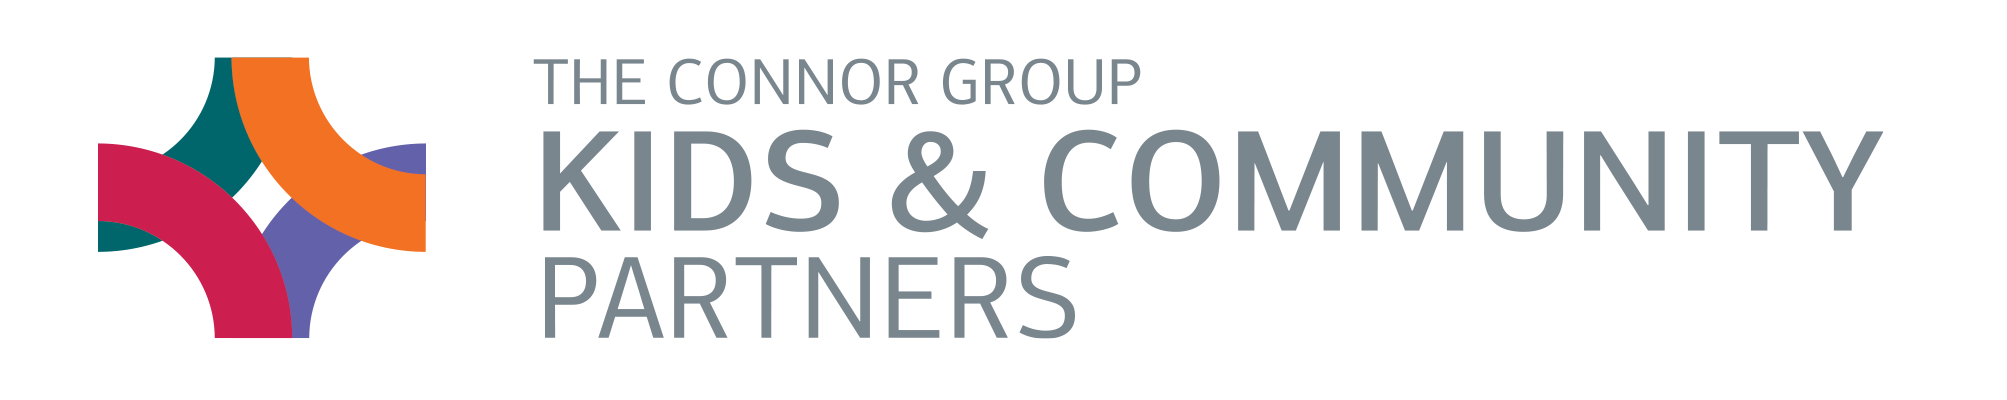 connor-group-kids-community-partners